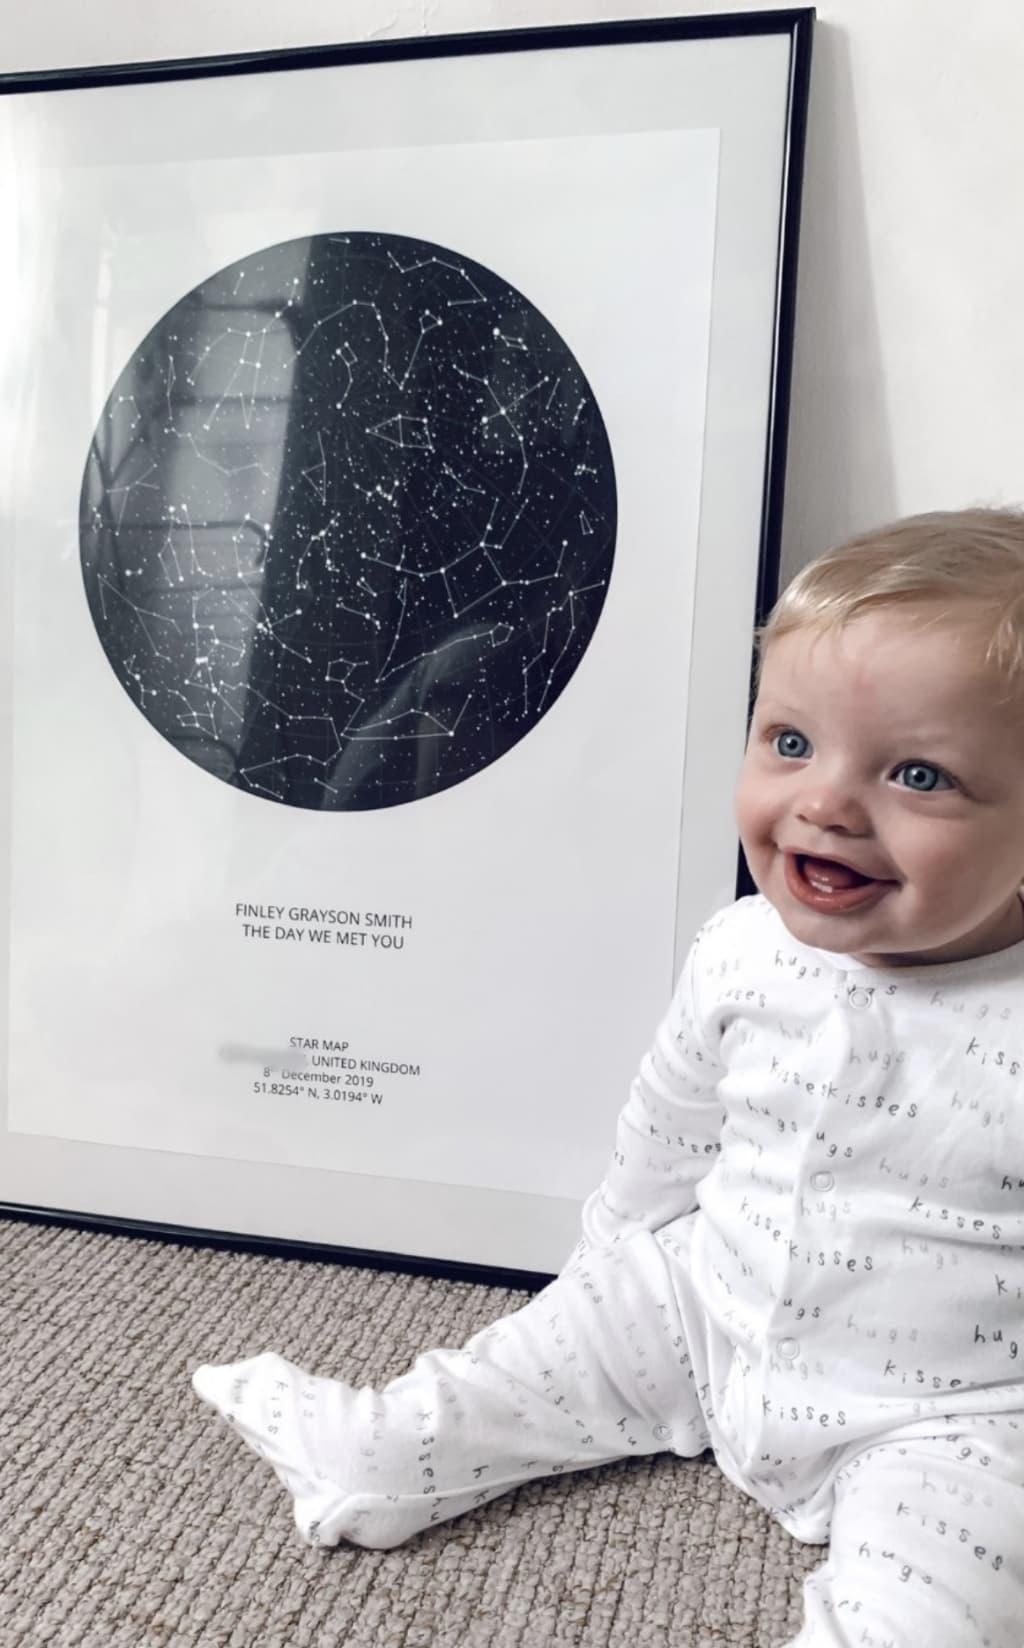 A baby sitting next to a framed star map